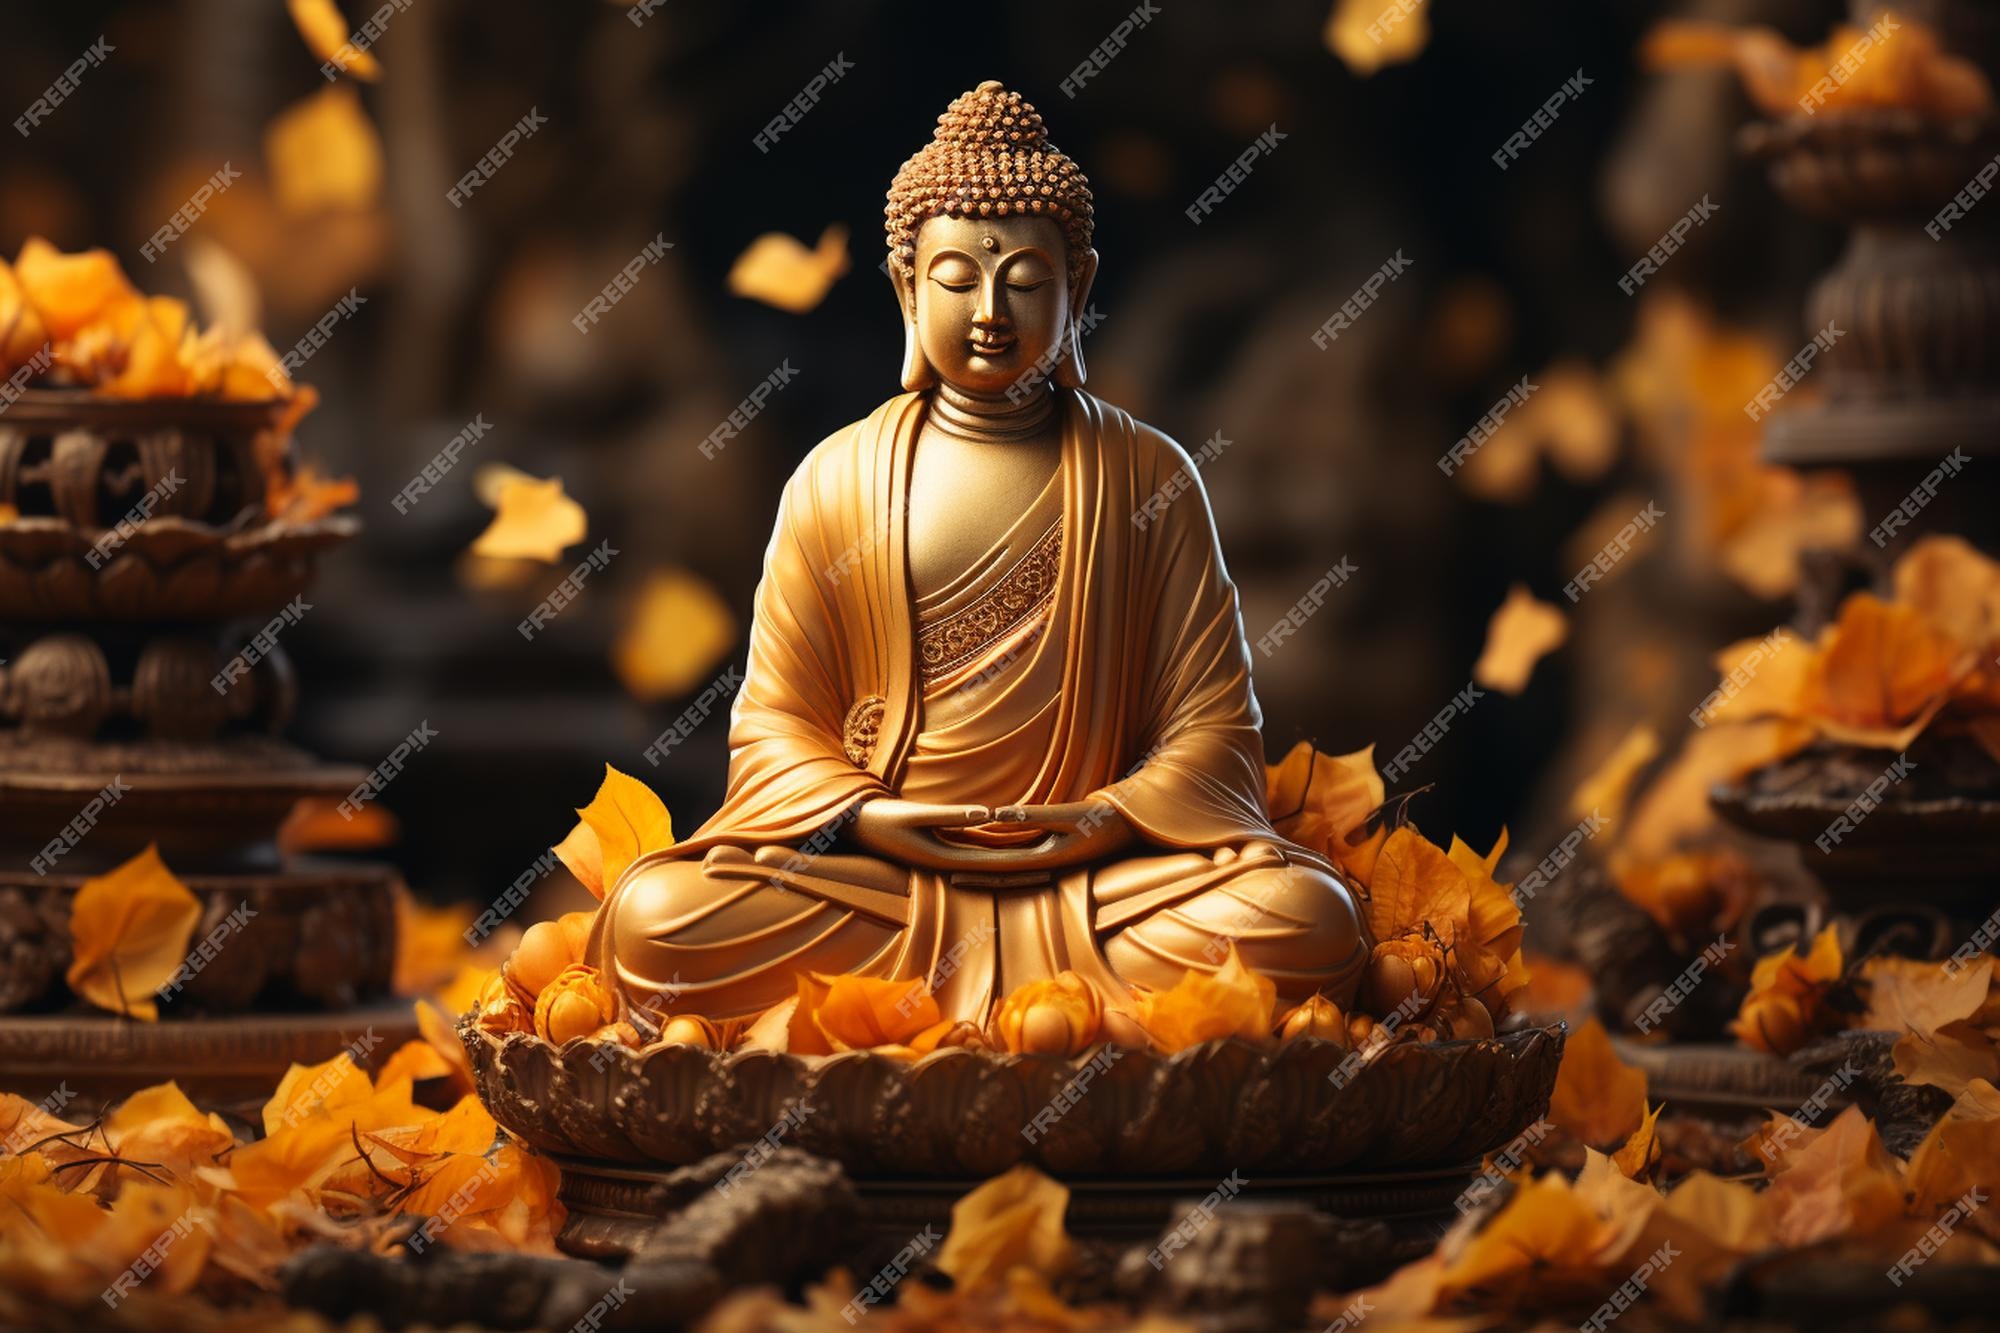 Premium Photo | Golden buddha statue with autumn leaves in temple ...